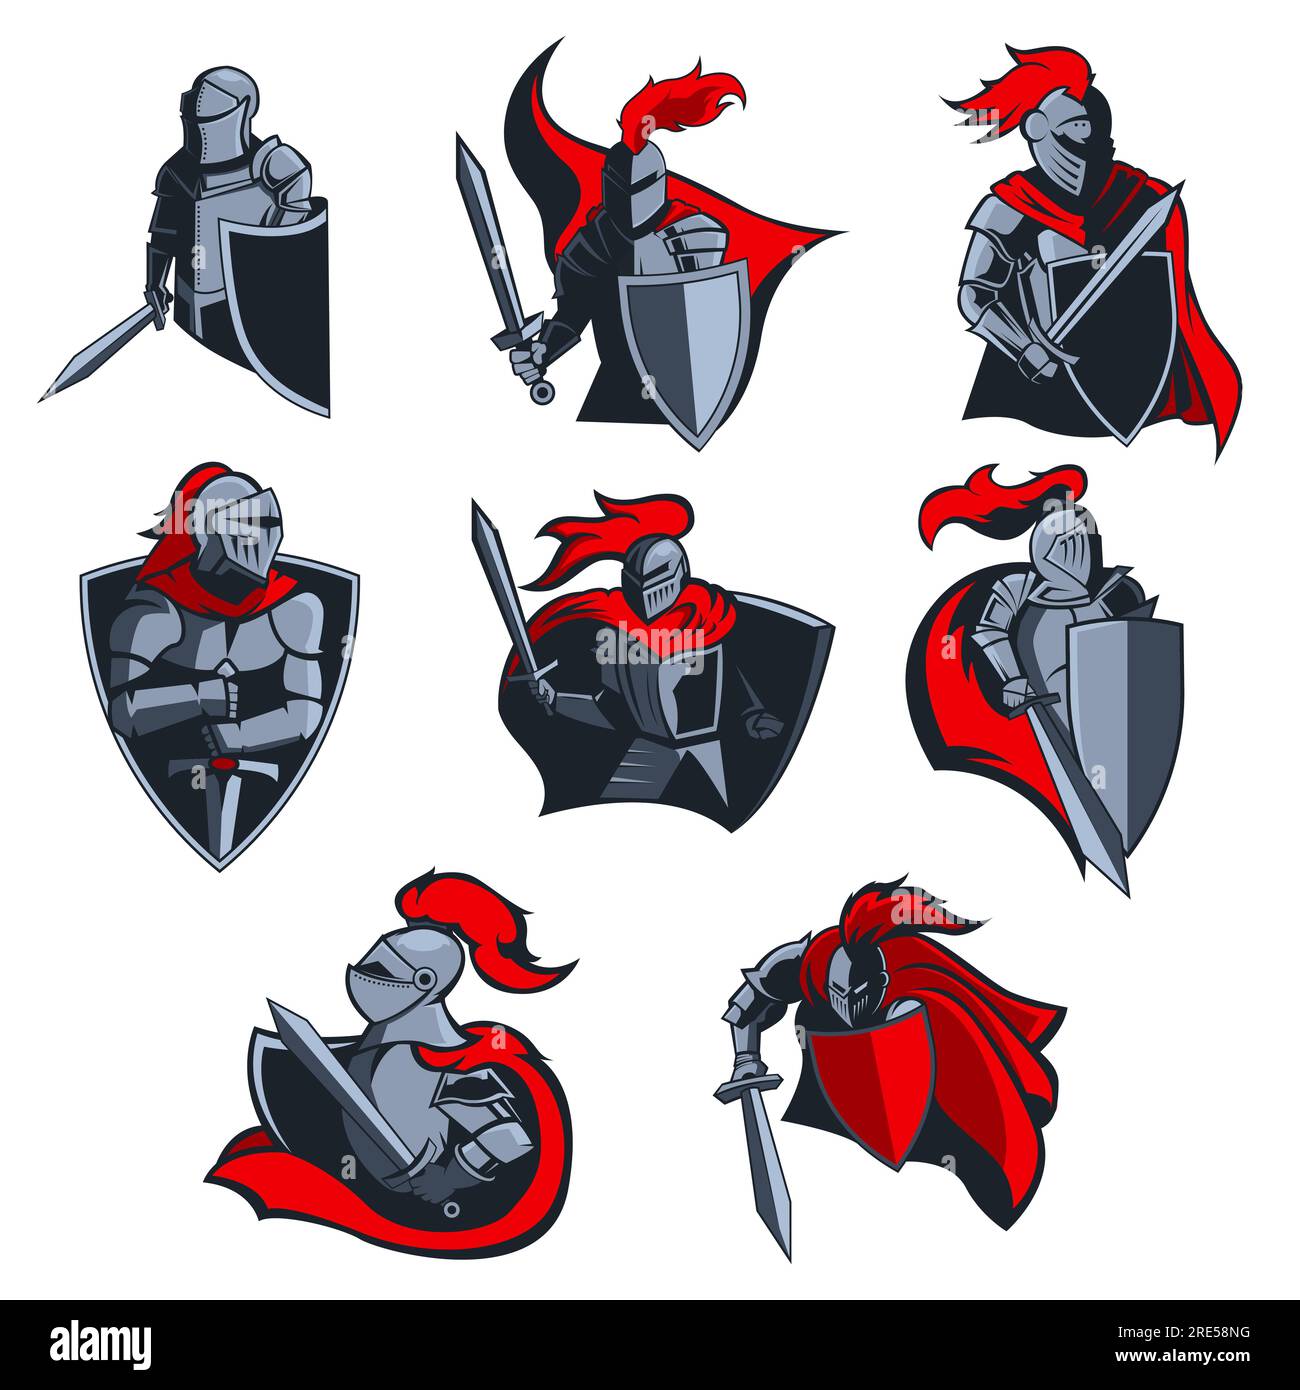 Knight vector icons of medieval warriors with armour helmets, swords and shields, red capes and plumes. Sport team mascot or emblem, heraldic coat of arms design with soldiers and weapons Stock Vector